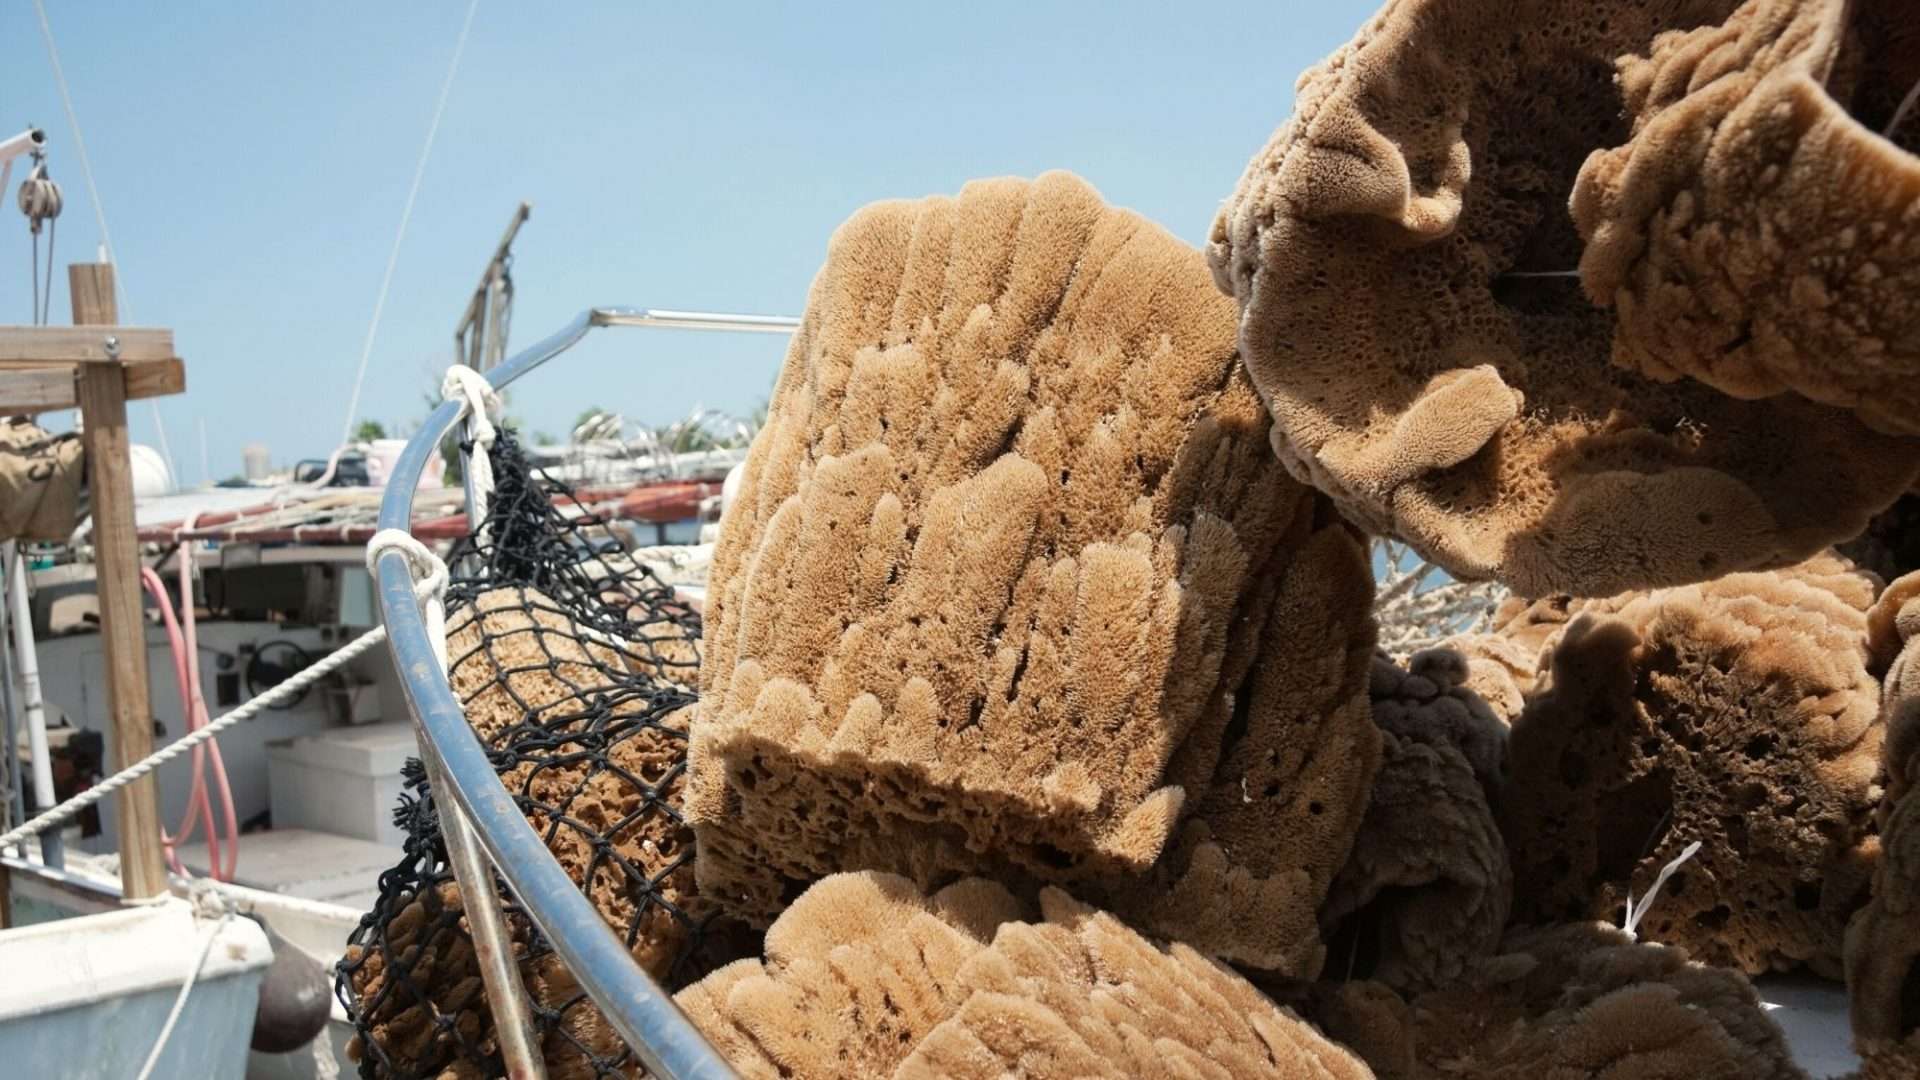 sponges on a boat